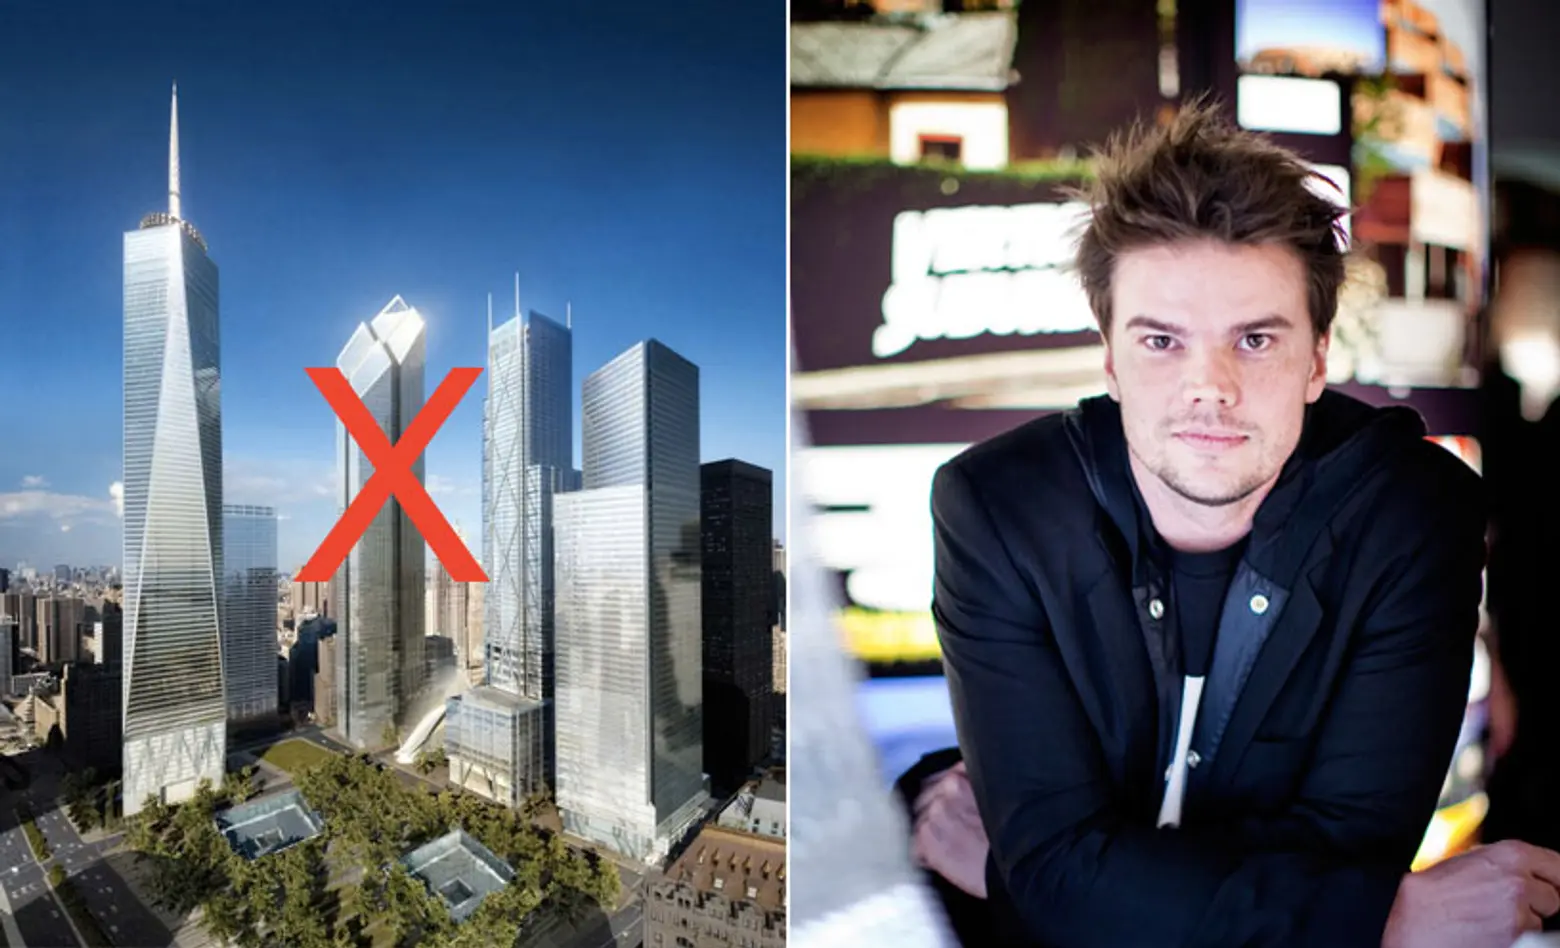 2 World Trade Center May Ditch Norman Foster’s Design for a Bjarke Ingels Skyscraper